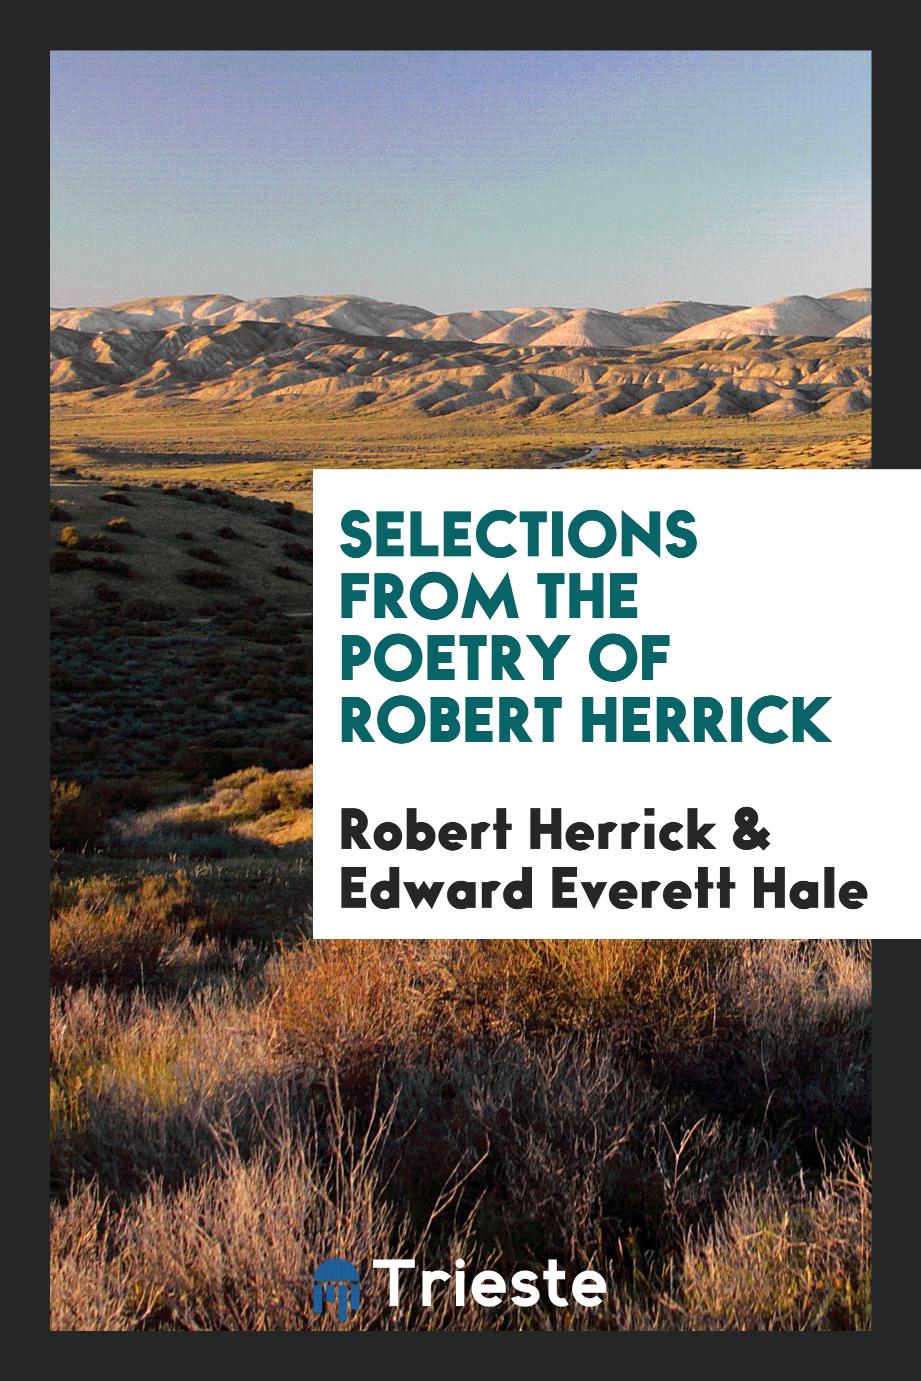 Selections from the poetry of Robert Herrick